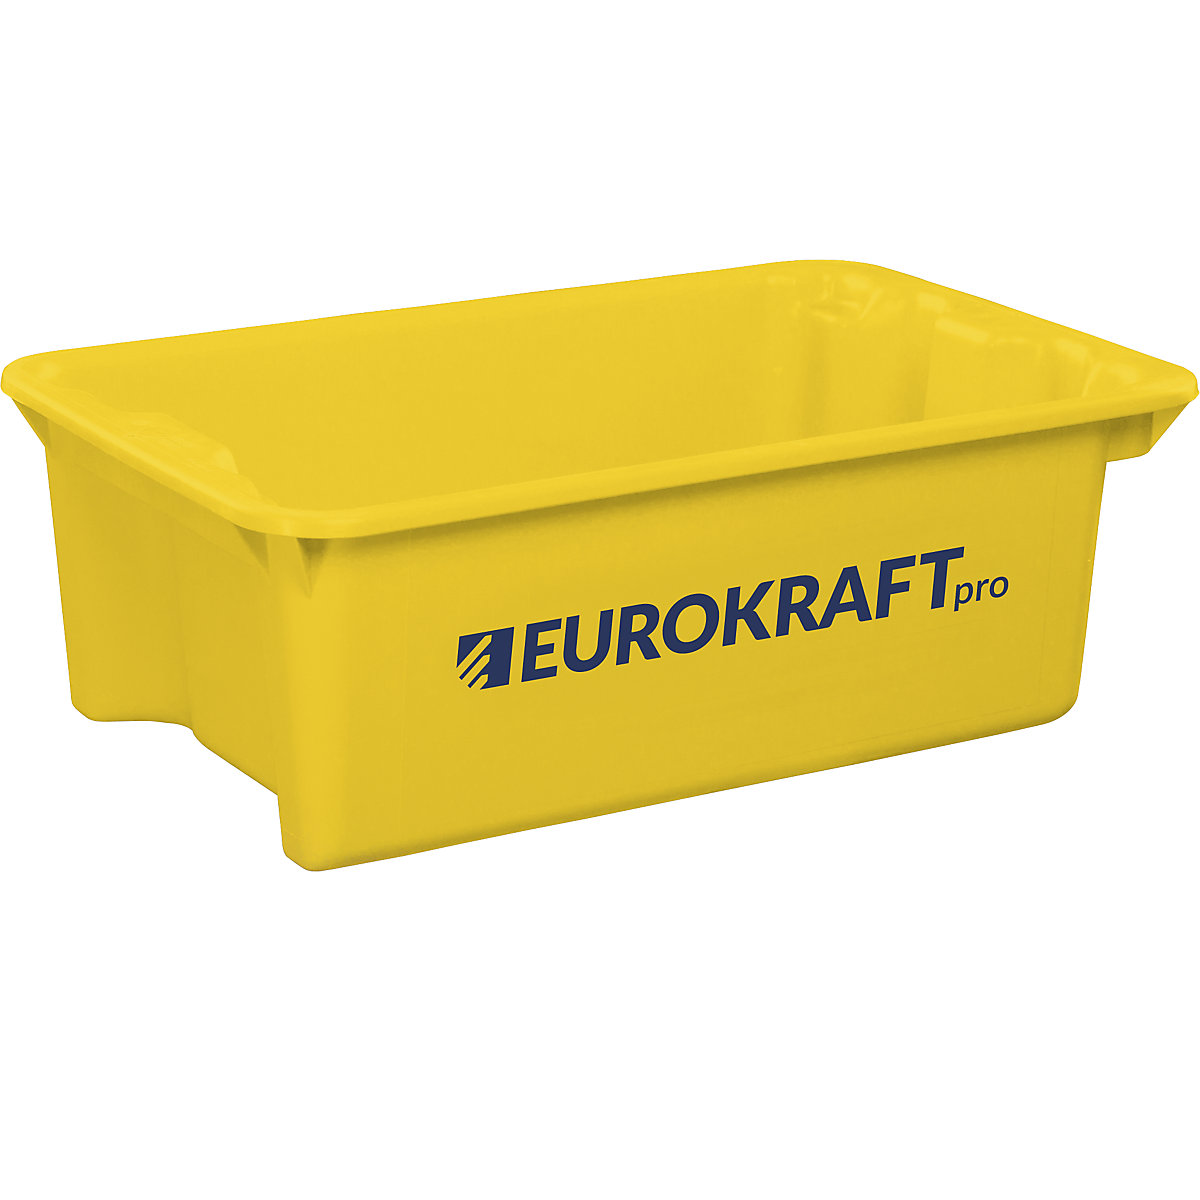 EUROKRAFTpro – Stack/nest container made of polypropylene suitable for foodstuffs, 34 l capacity, pack of 3, solid walls and base, yellow